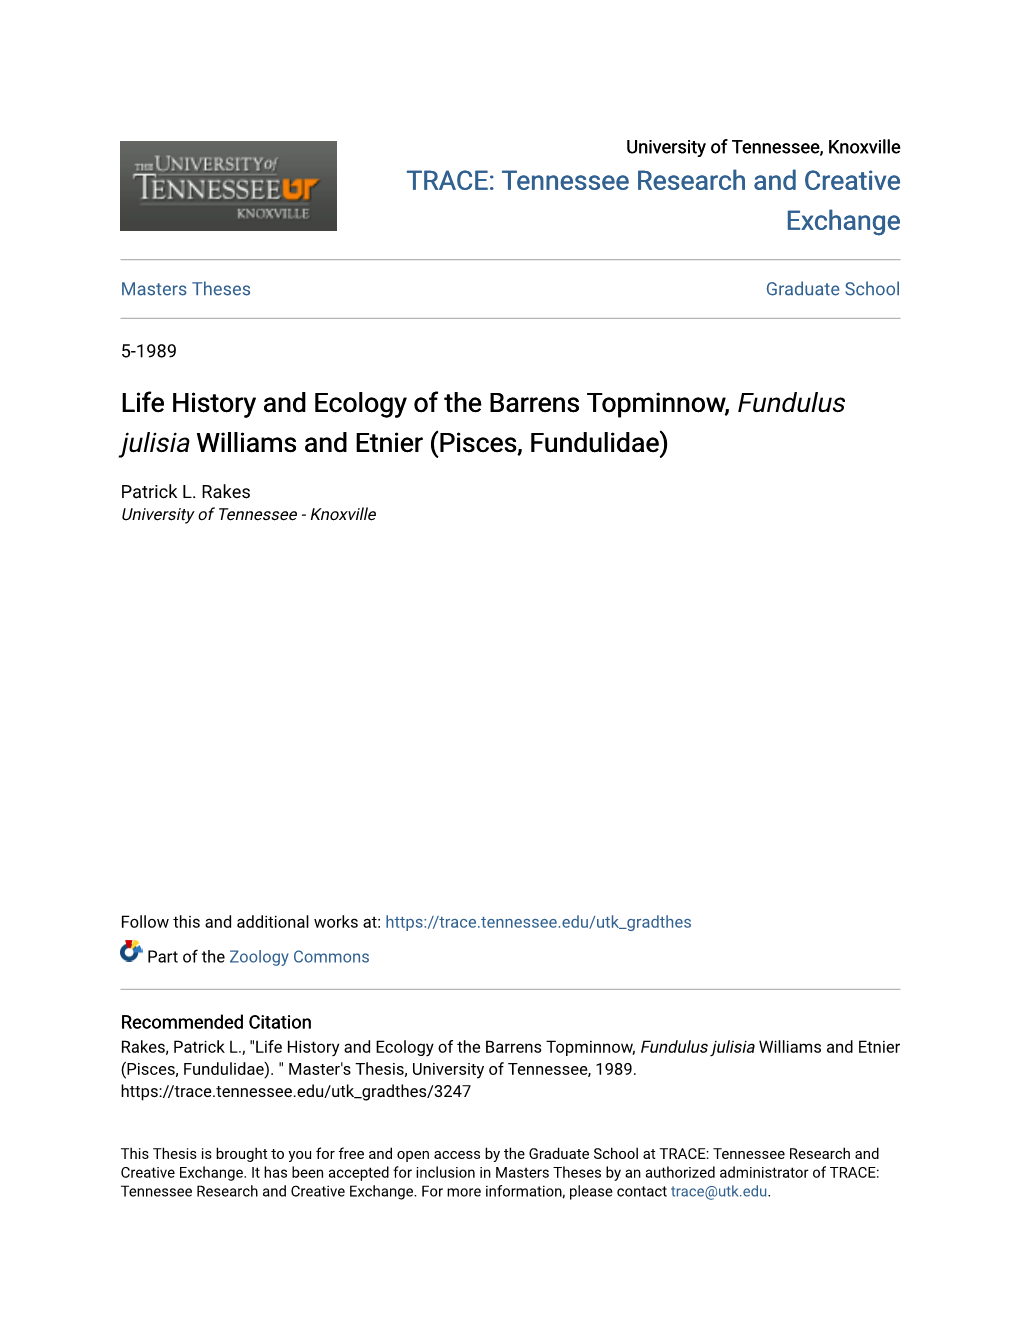 Life History and Ecology of the Barrens Topminnow, Fundulus Julisia Williams and Etnier (Pisces, Fundulidae)